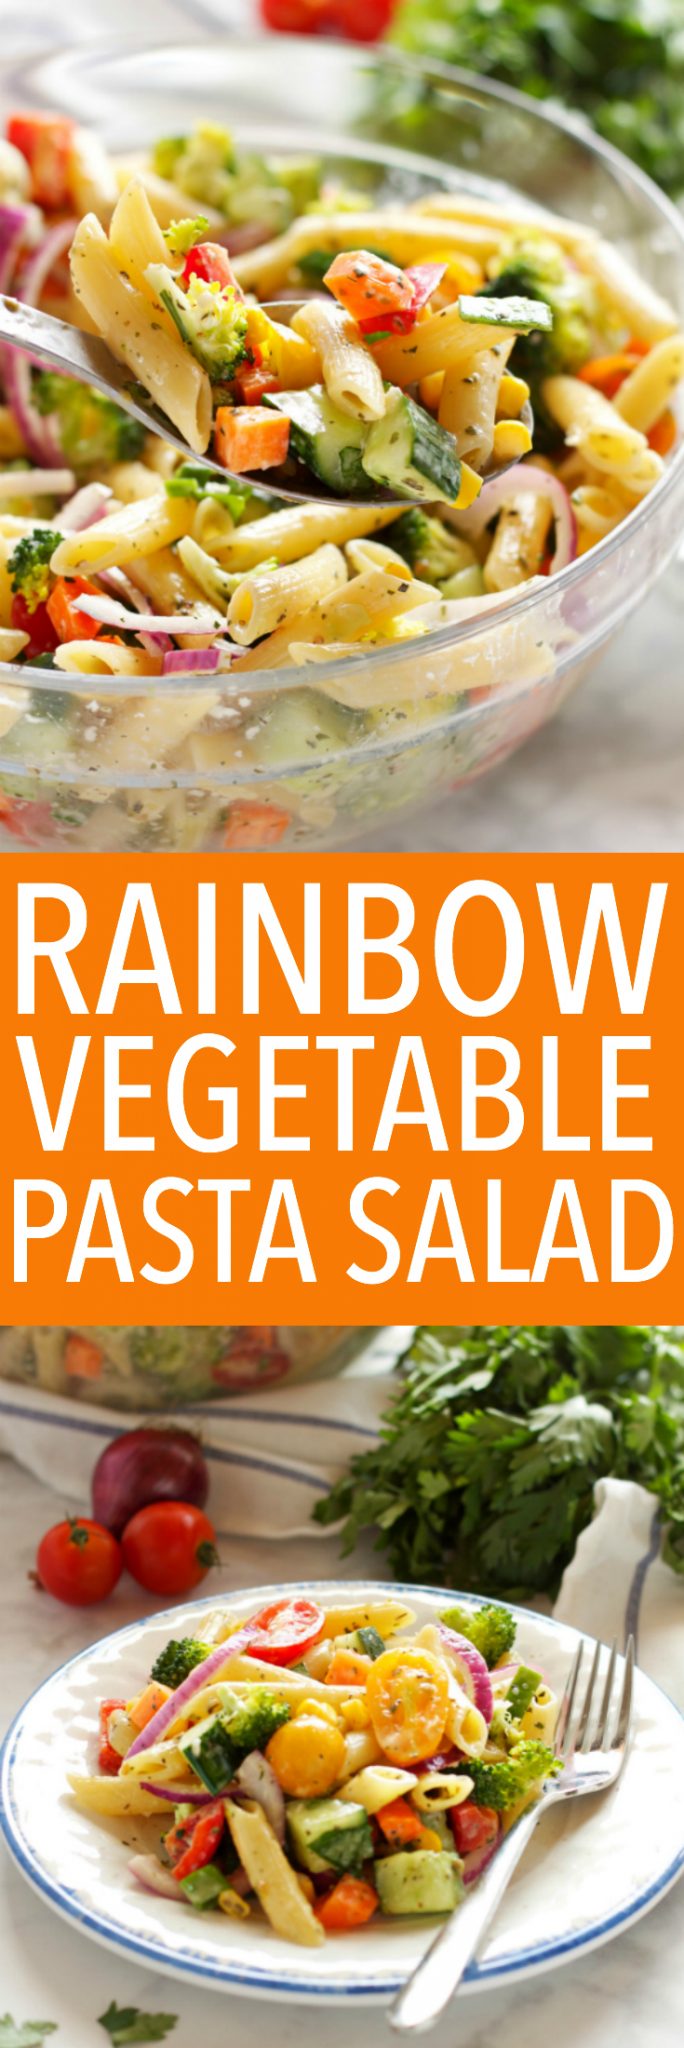 This Rainbow Vegetable Pasta Salad is packed with over 7 fresh vegetables, delicious pasta, and topped with an easy Creamy Italian Herb Dressing! Recipe from thebusybaker.ca via @busybakerblog